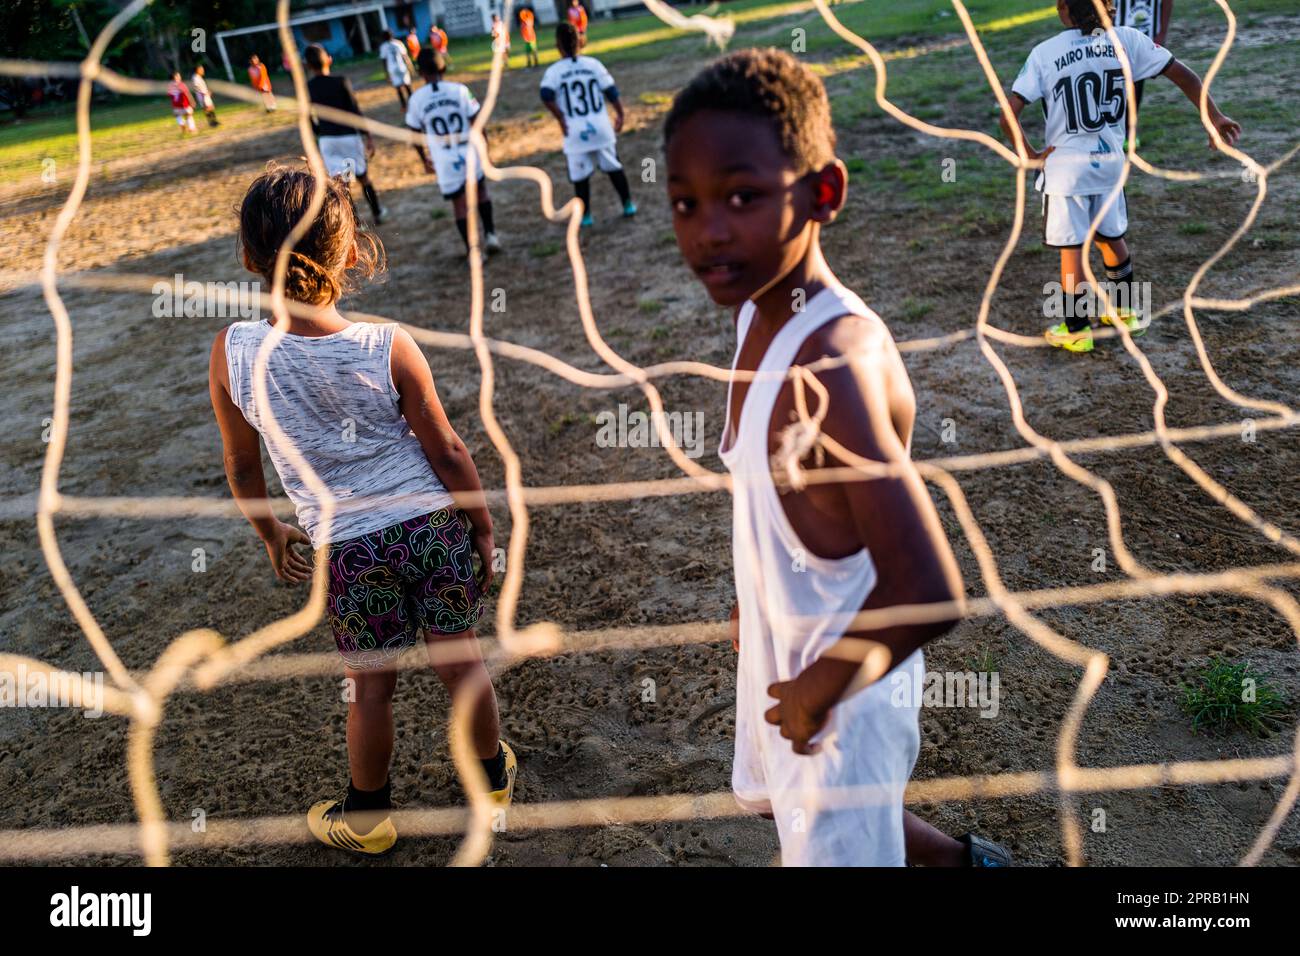 Young Afro-Colombian football players play a friendly match during a training session on a dirt playing field in Necoclí, Antioquia, Colombia. Stock Photo